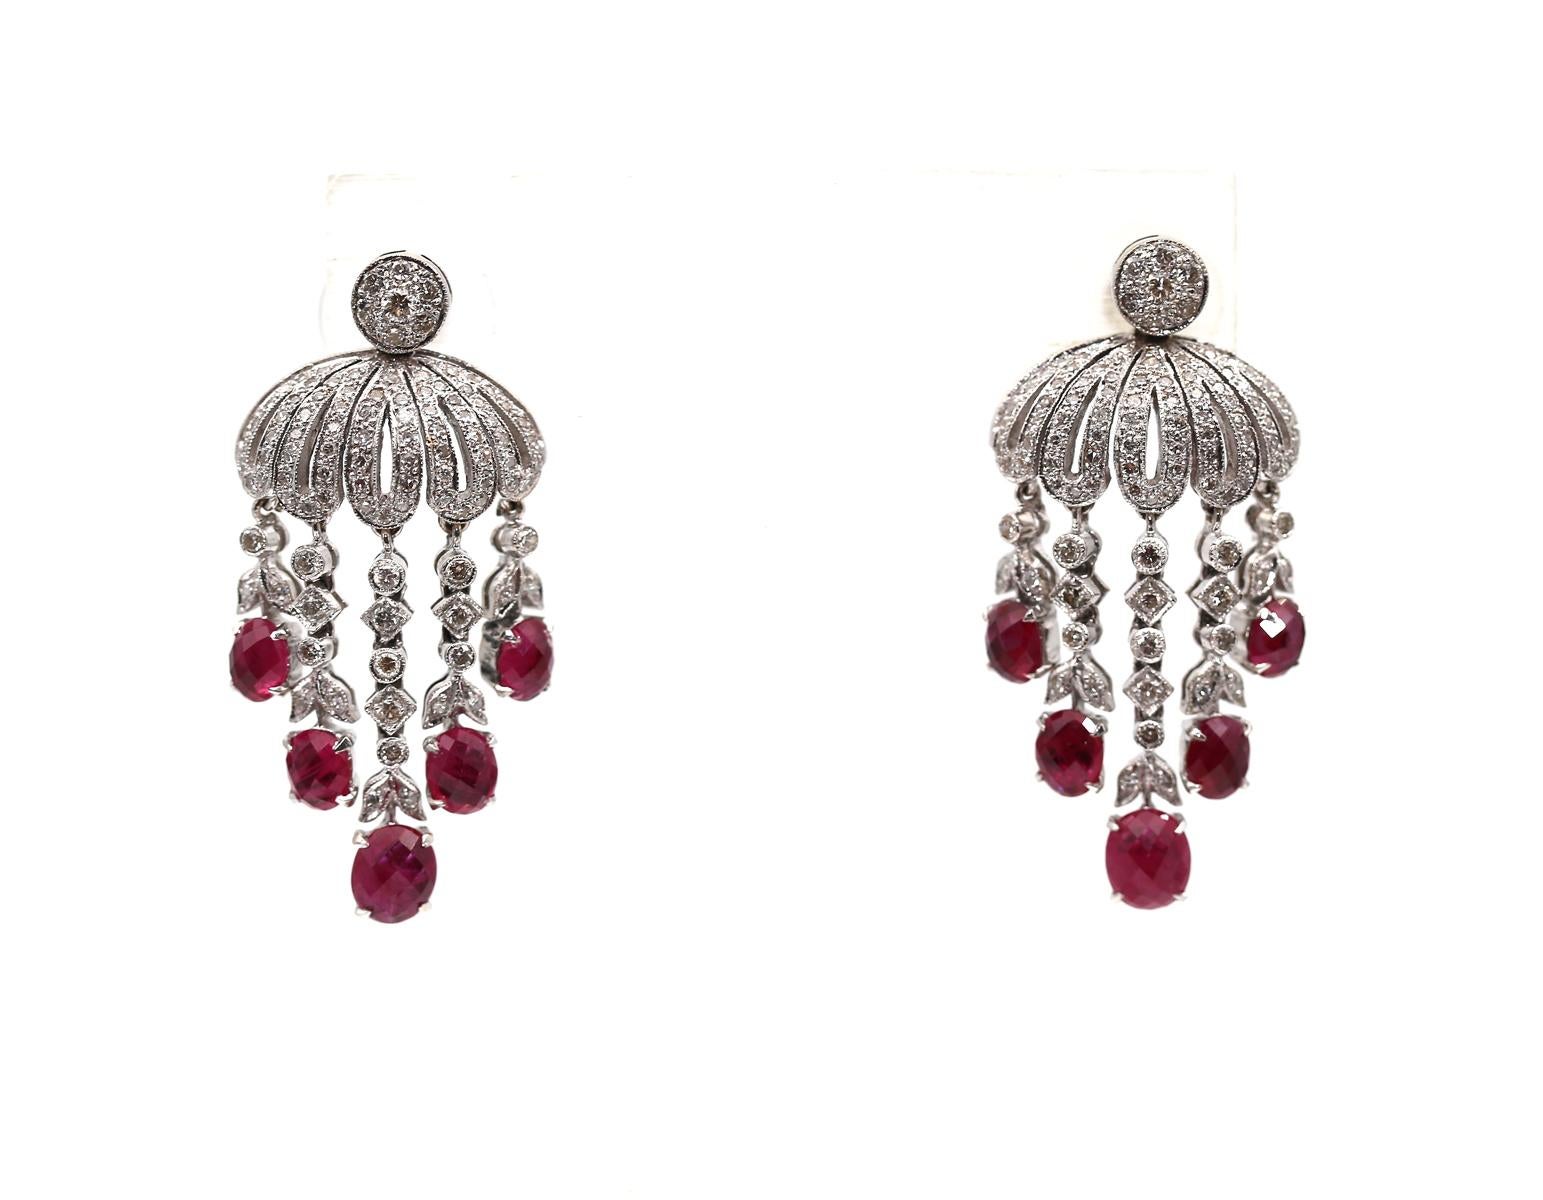 14K White Gold Ruby Diamond  Chandelier Earrings, 1980

Pair of 14K White Gold Ruby Diamond Earrings. An elegant pair of chandelier earrings with milgrain finish. Containing numerous round brilliant and single cut Diamonds weighing approximately